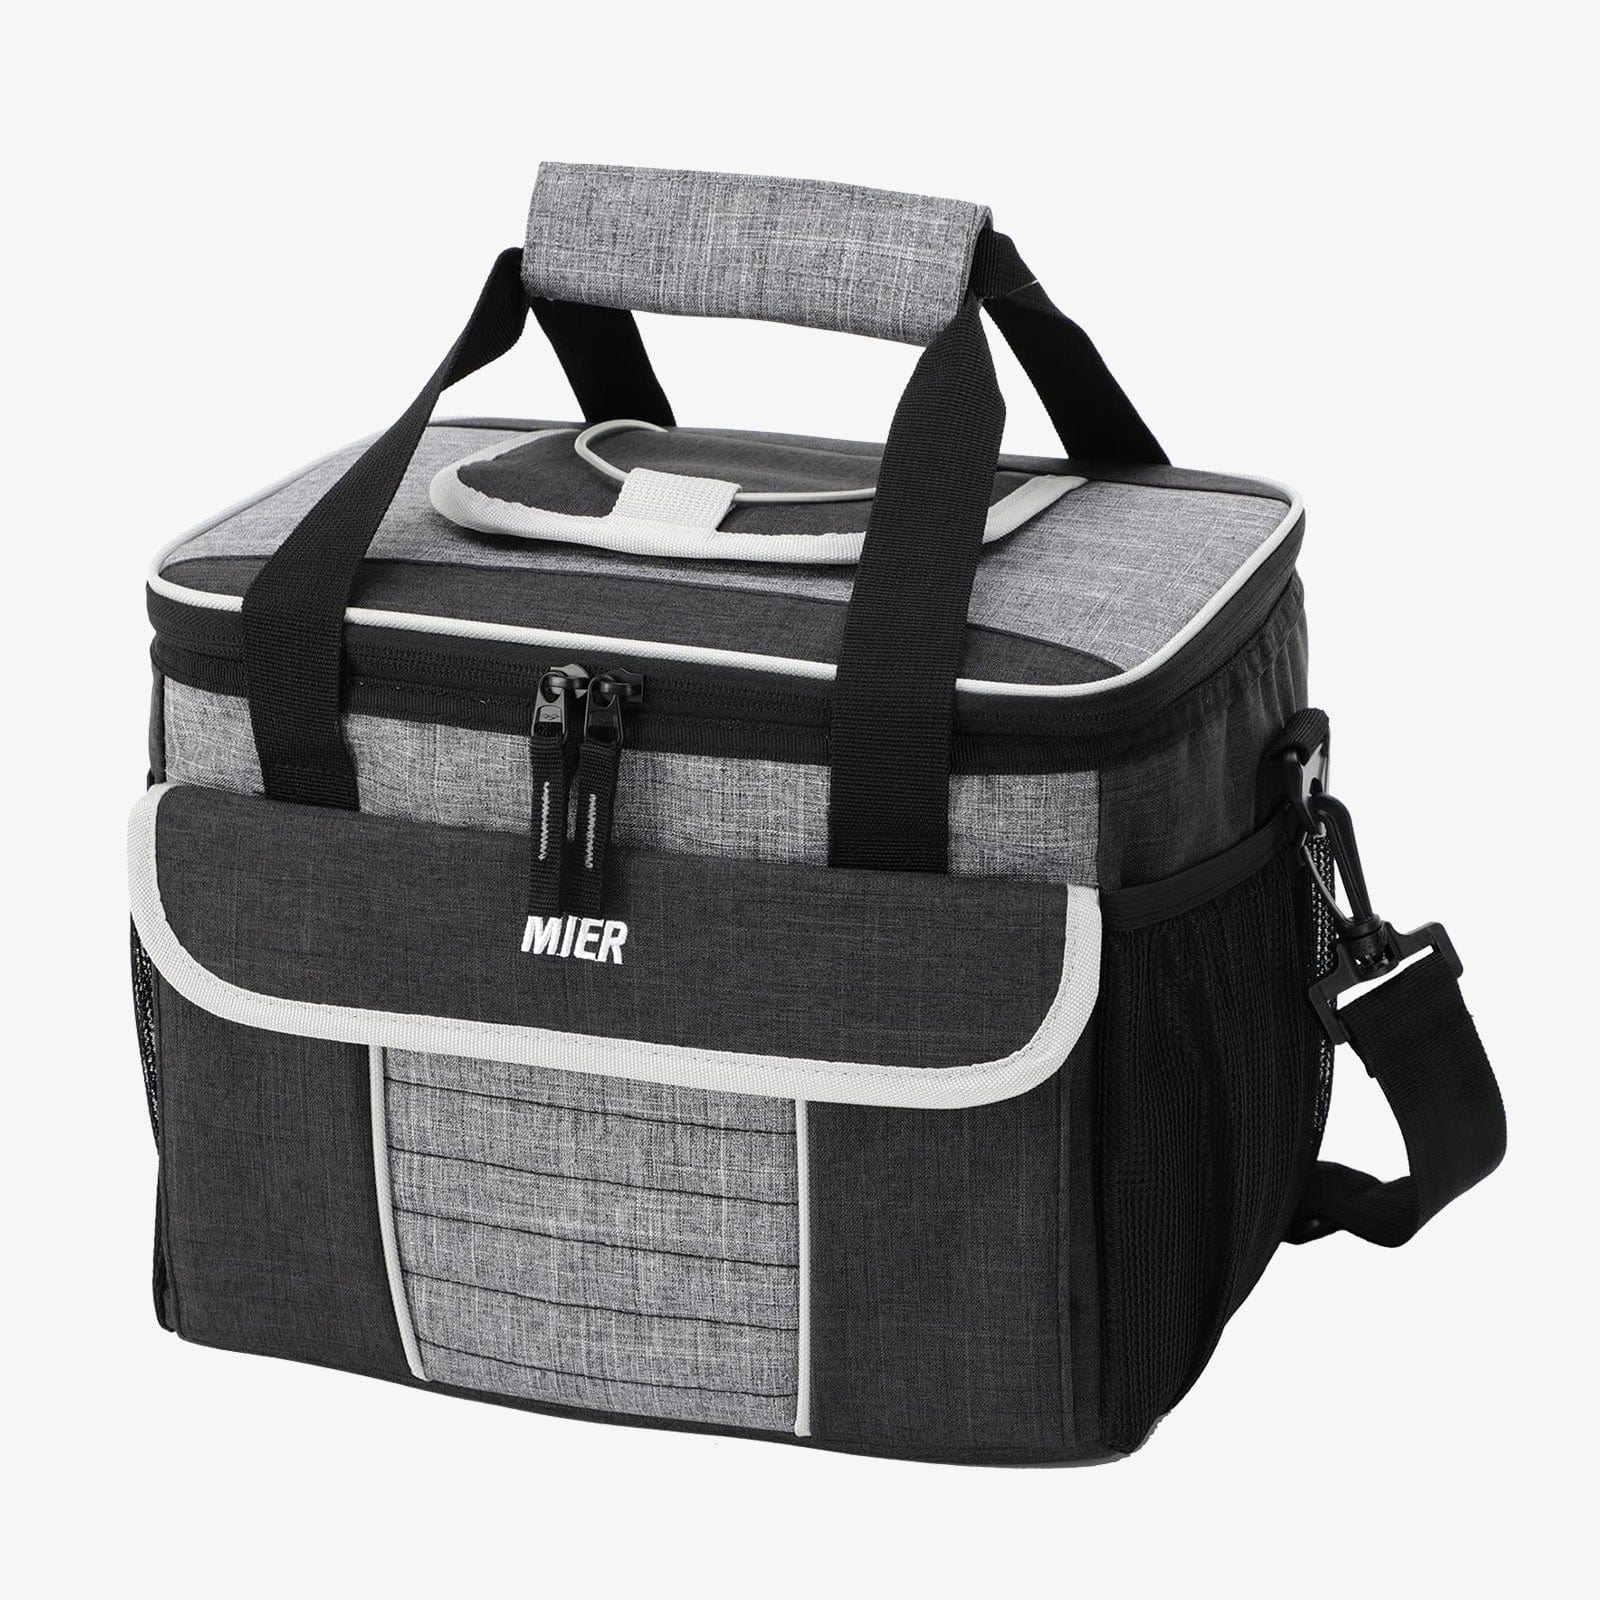 Large Soft Lunchbox Cooler Bag Insulated Lunch Bags for Adults Adult Lunch Bag Black Gray / 18 Can MIER